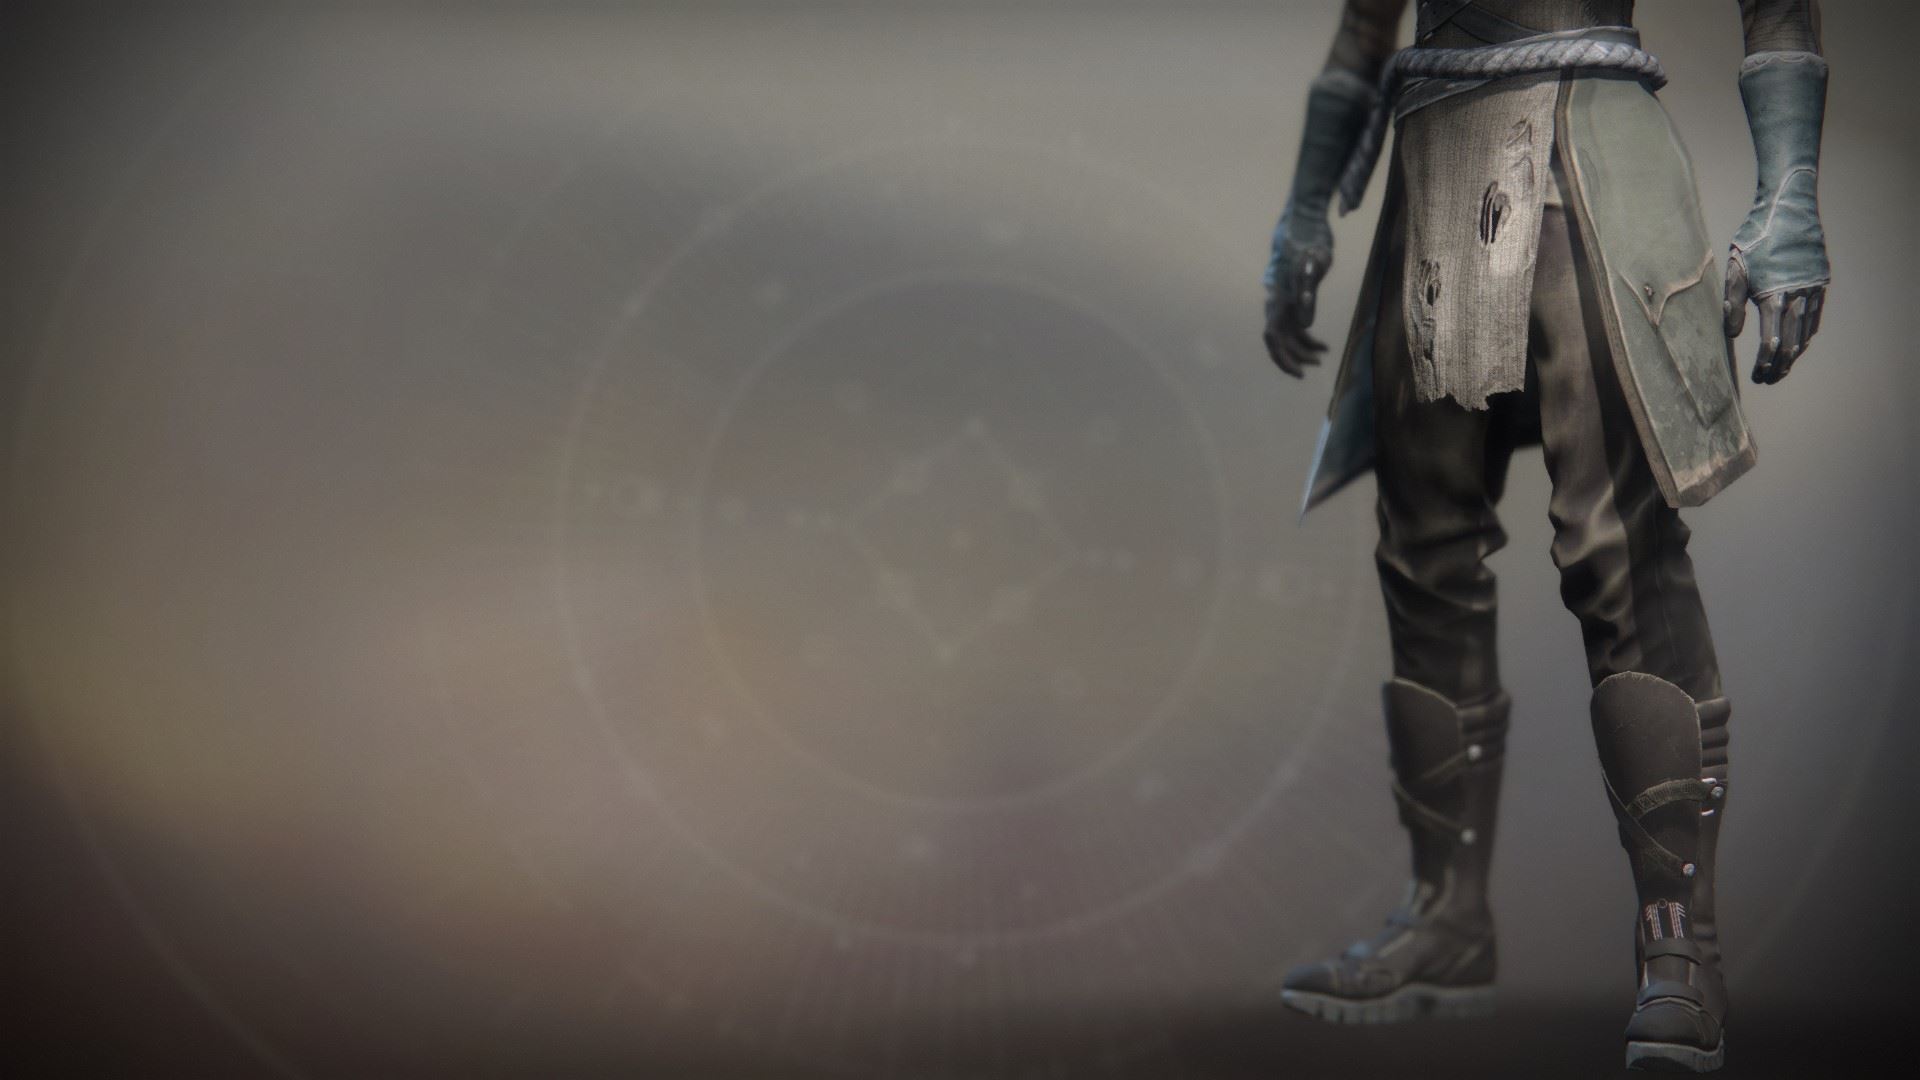 An in-game render of the Solstice Boots (Scorched).